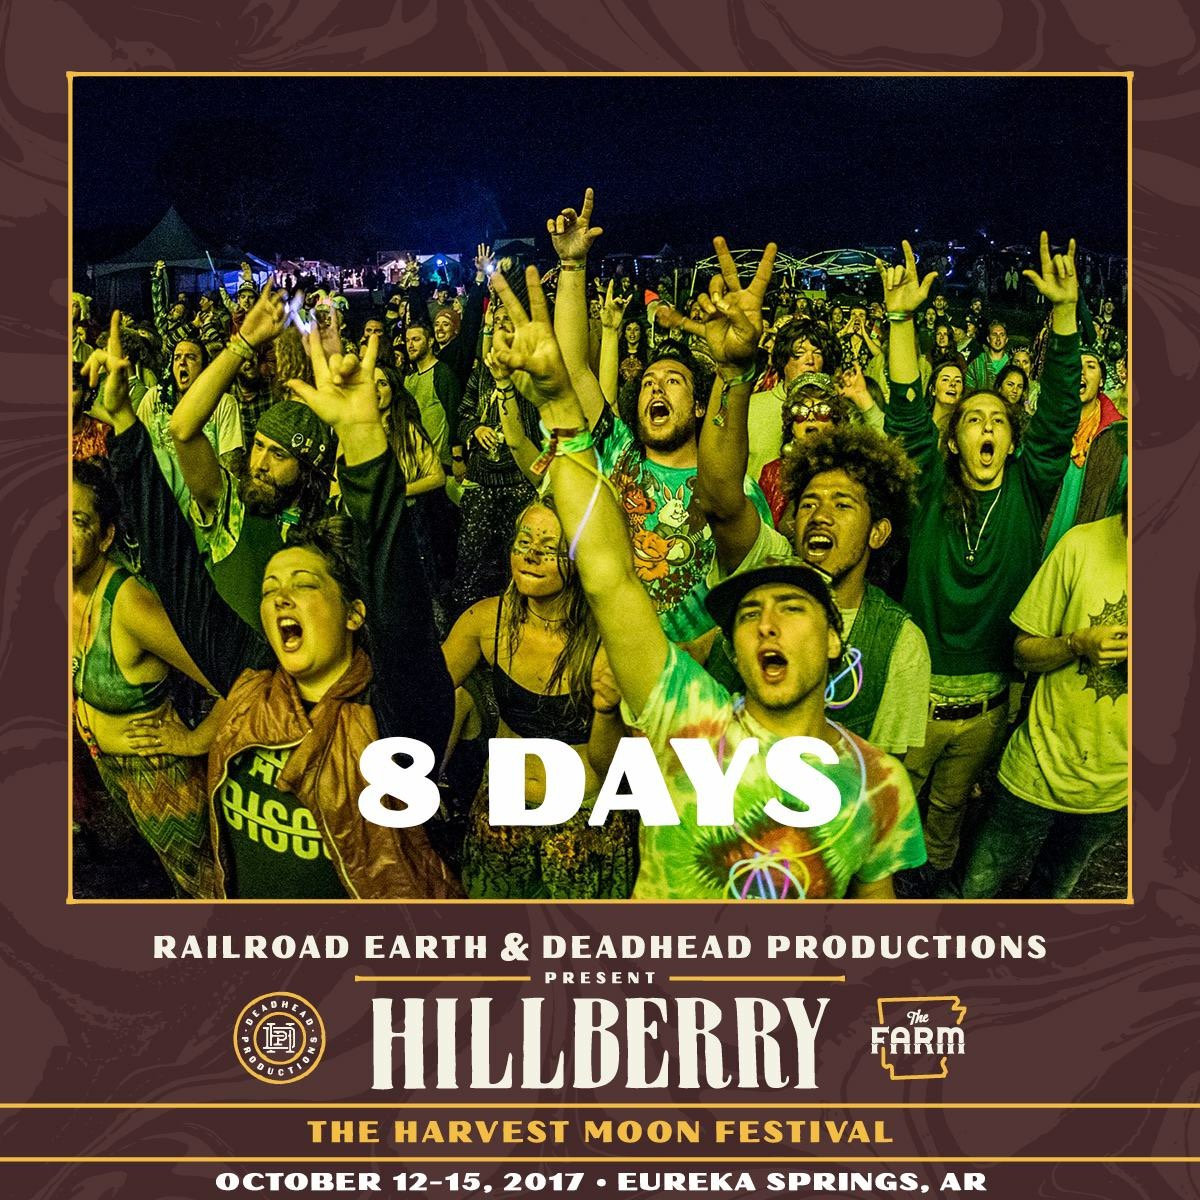 8 Days remaining until you can dance away the night with friends at the Farm! We can't wait to see y'all at #Hillberry2017 Photo:@jamieseed